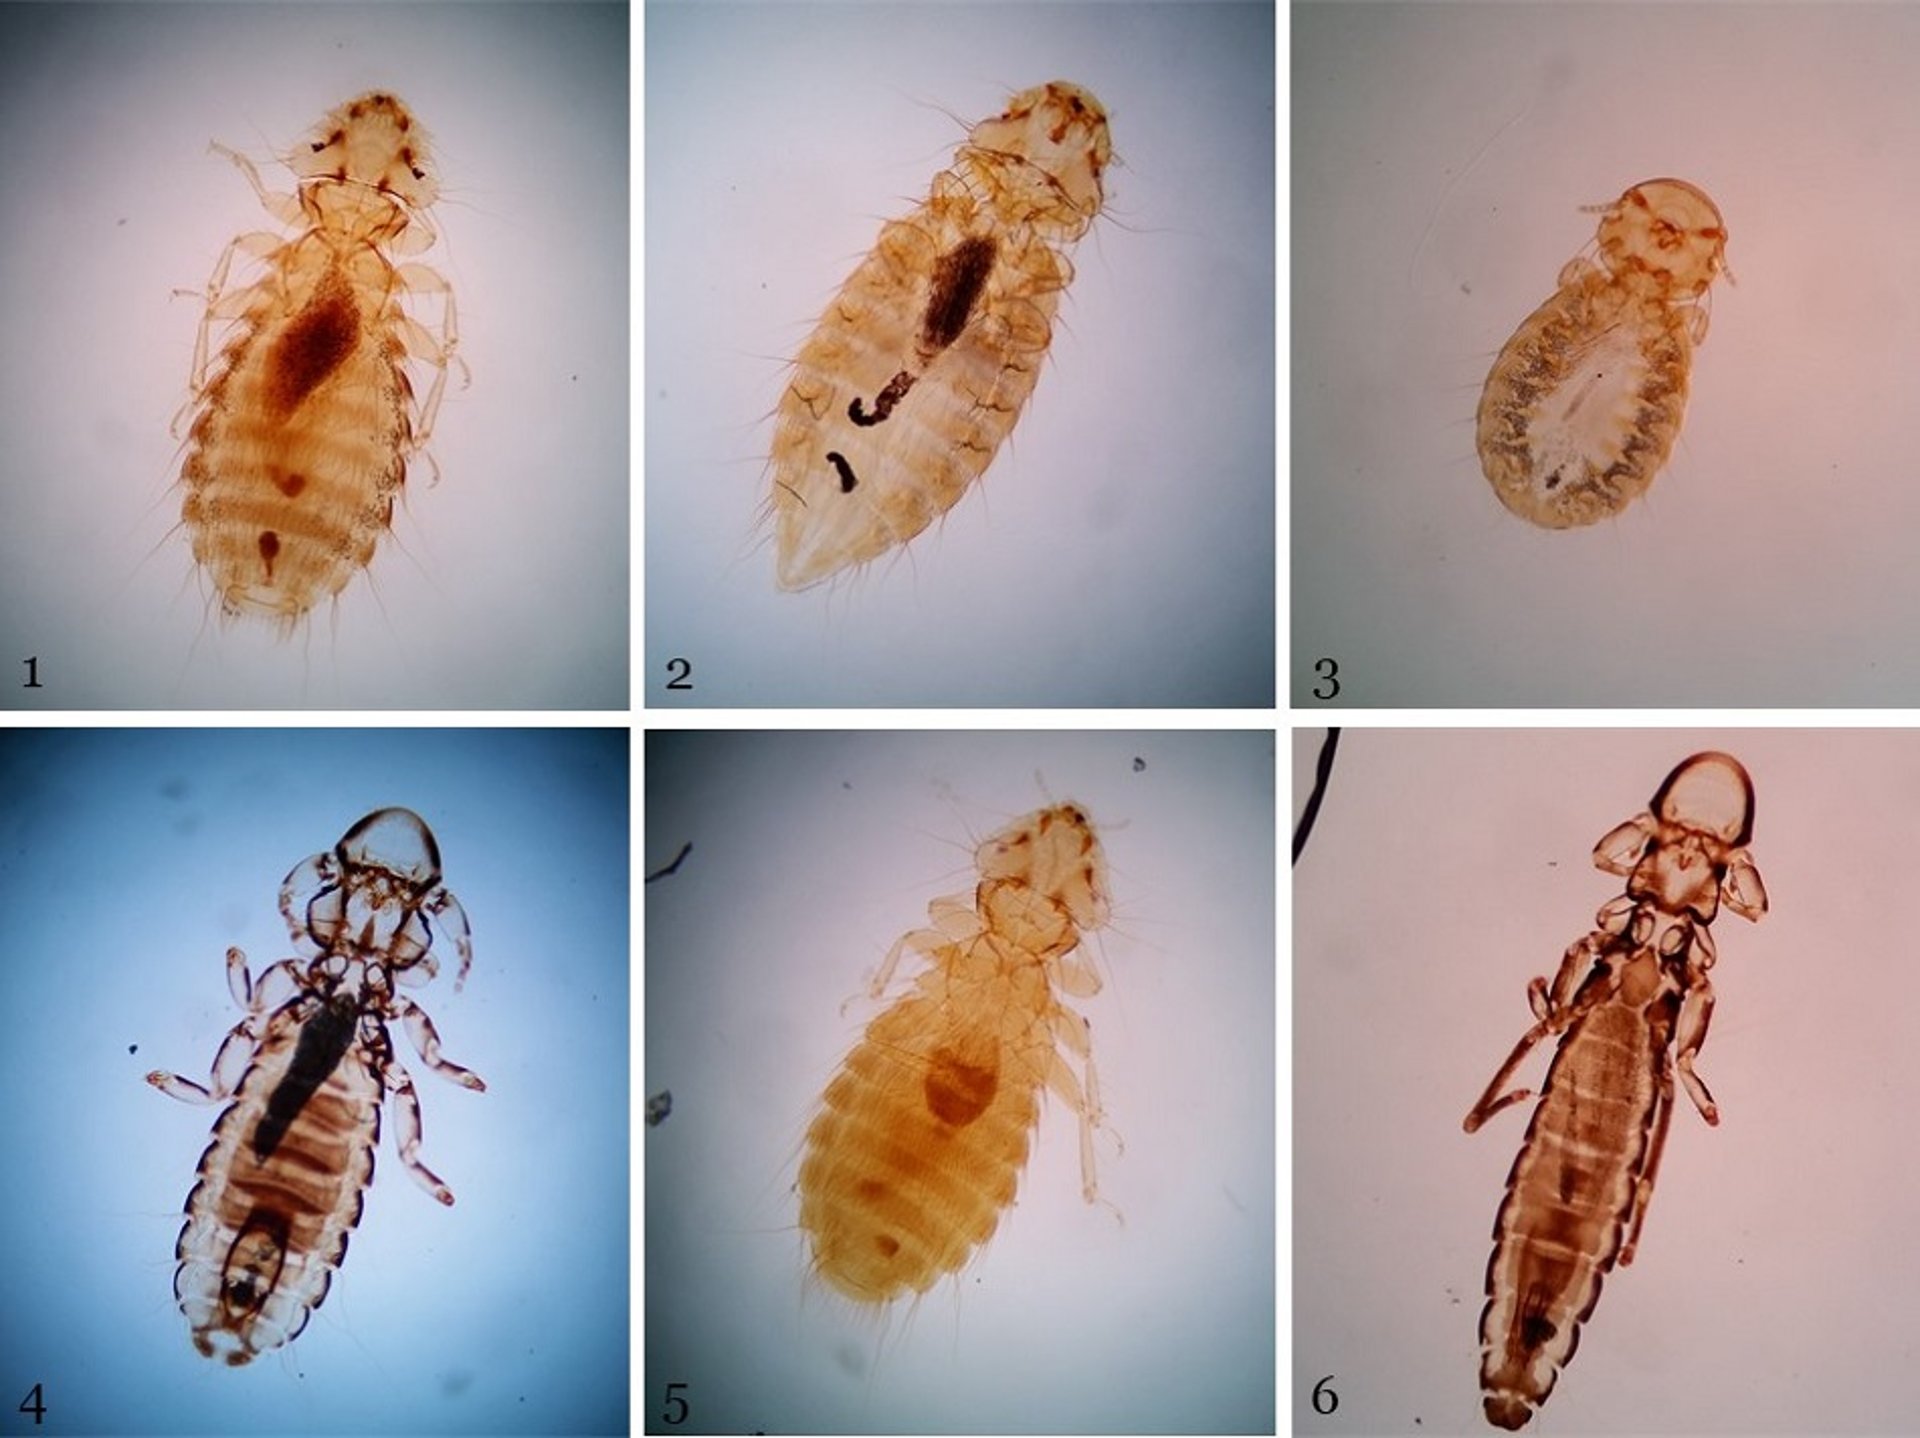 Examples of poultry louse species